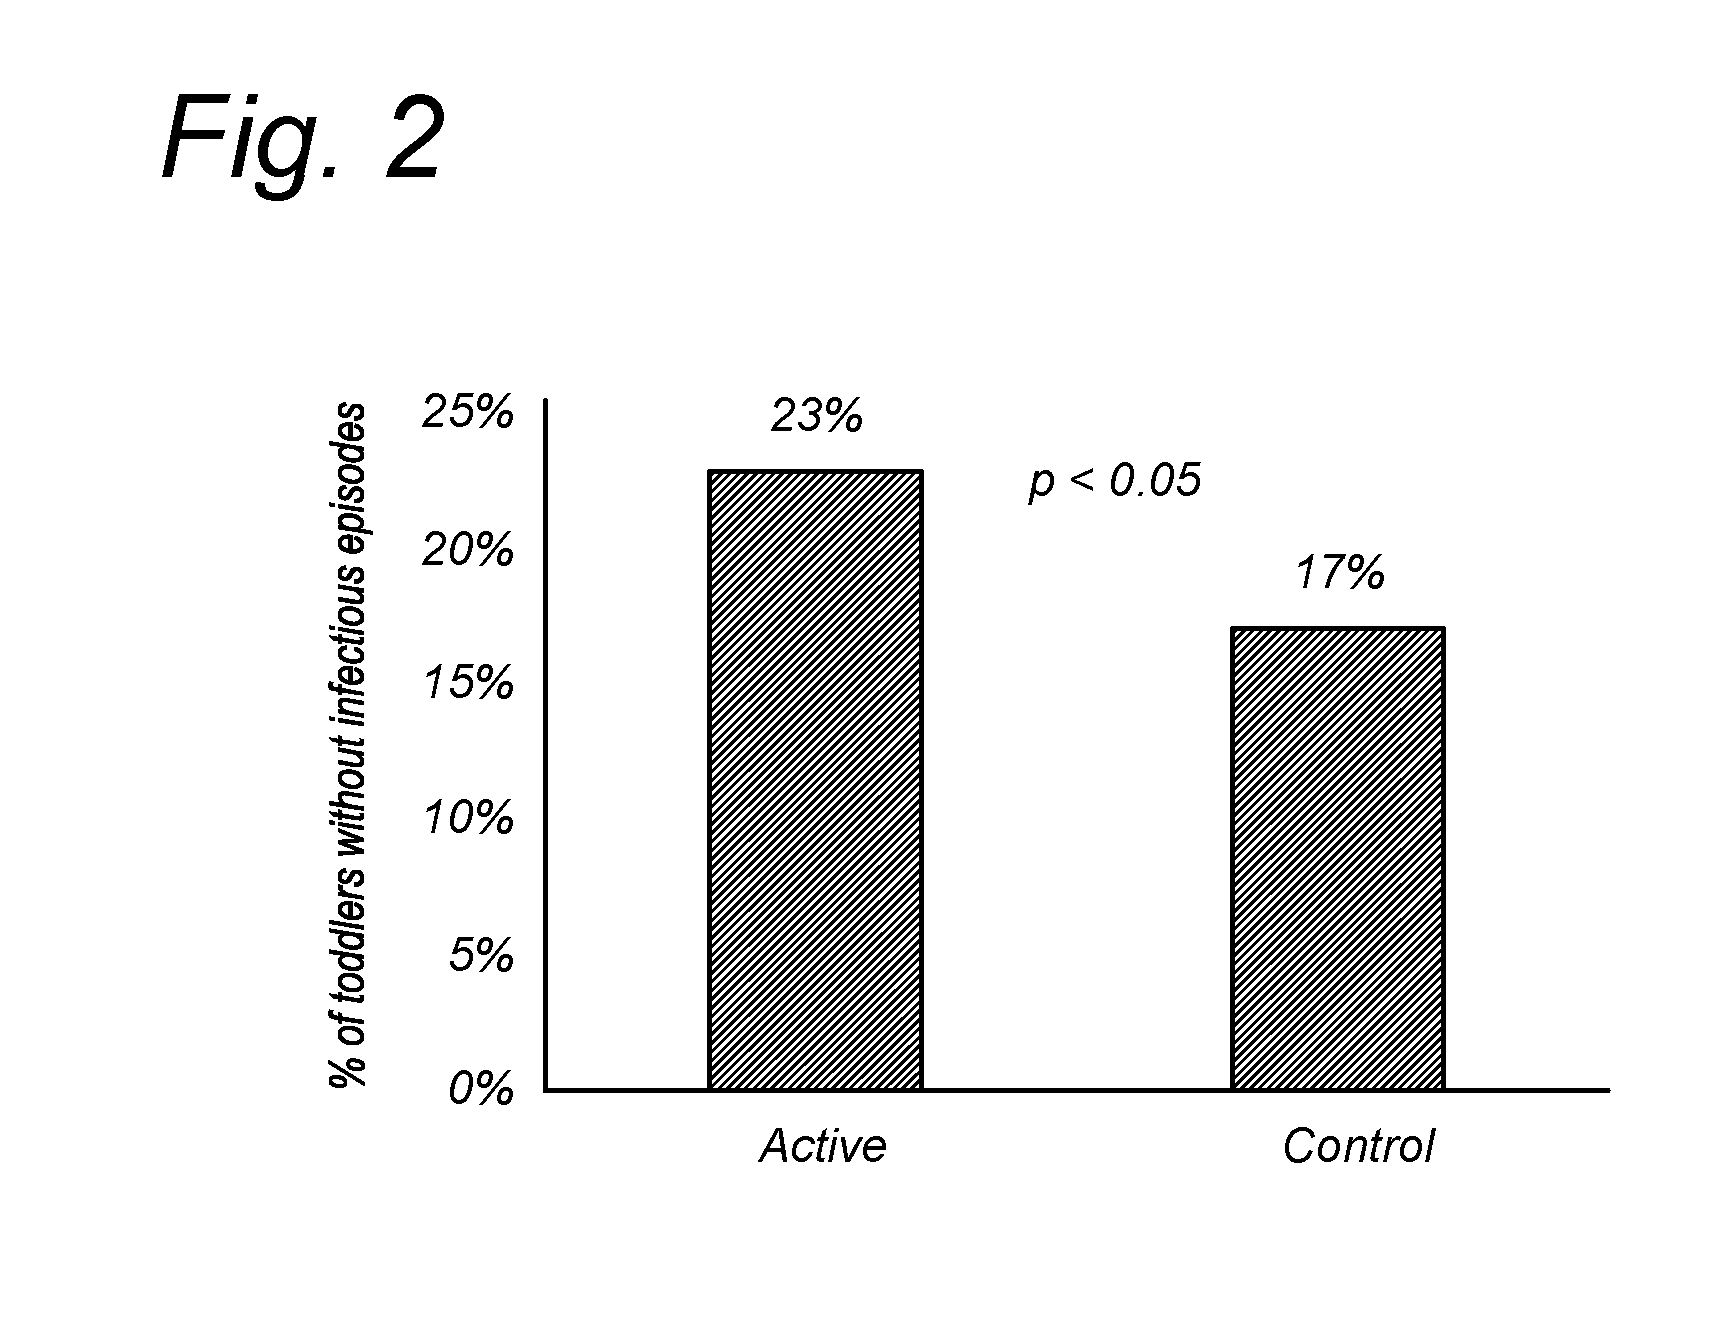 Method for reducing the occurrence of infection in young children